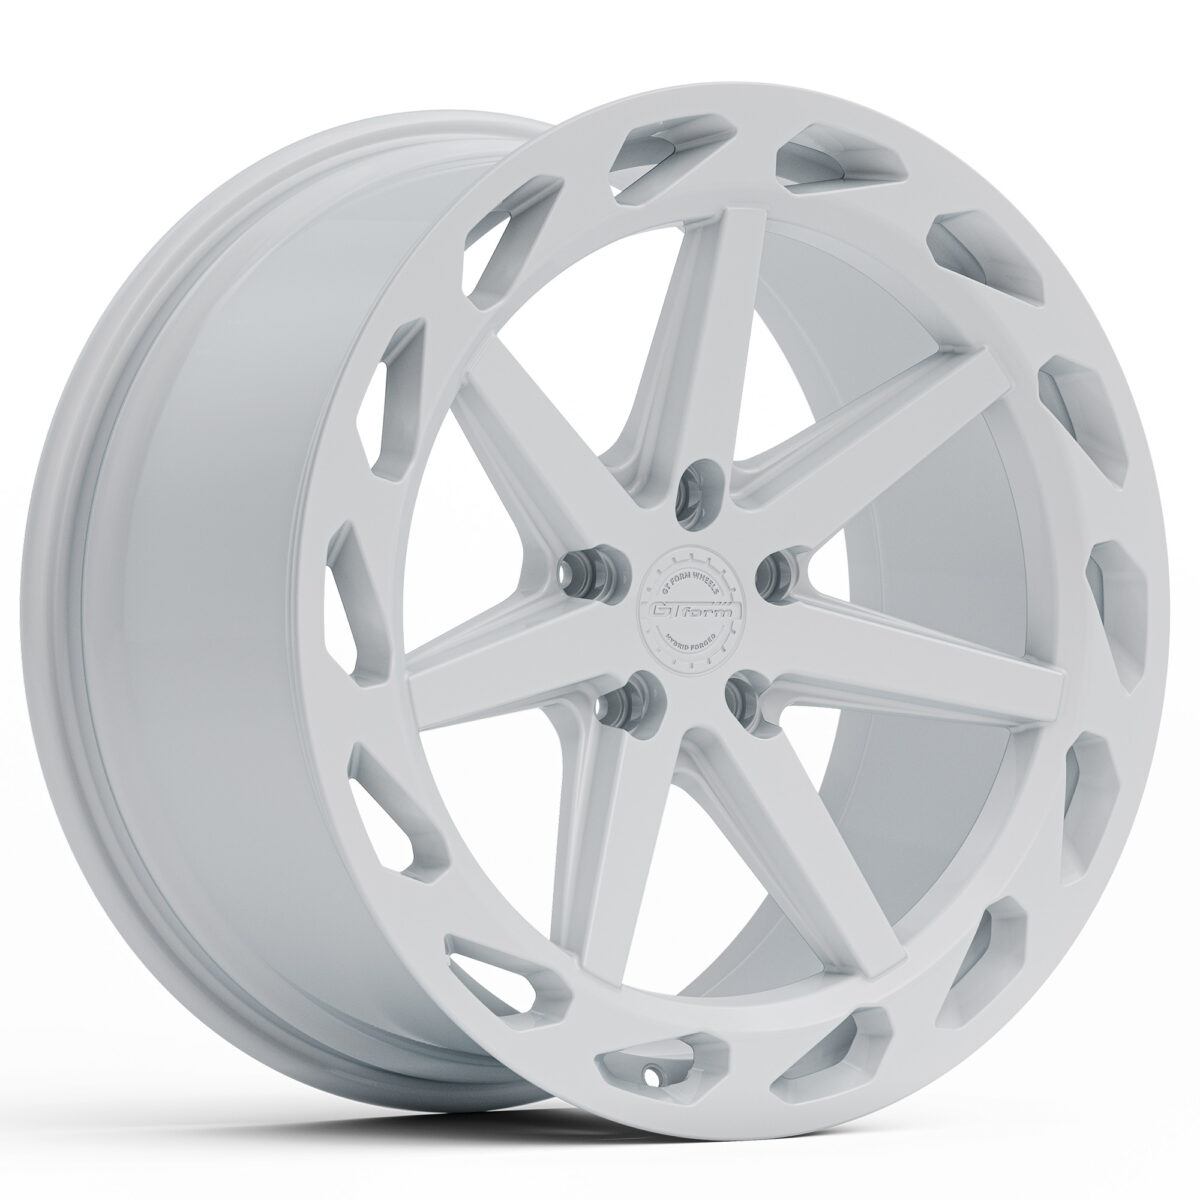 PERFORMANCE WHEELS GT FORM HF4.1 HYBRID FORGED GLOSS WHITE 20X9 20X10 20X11 STAGGERED RIMS